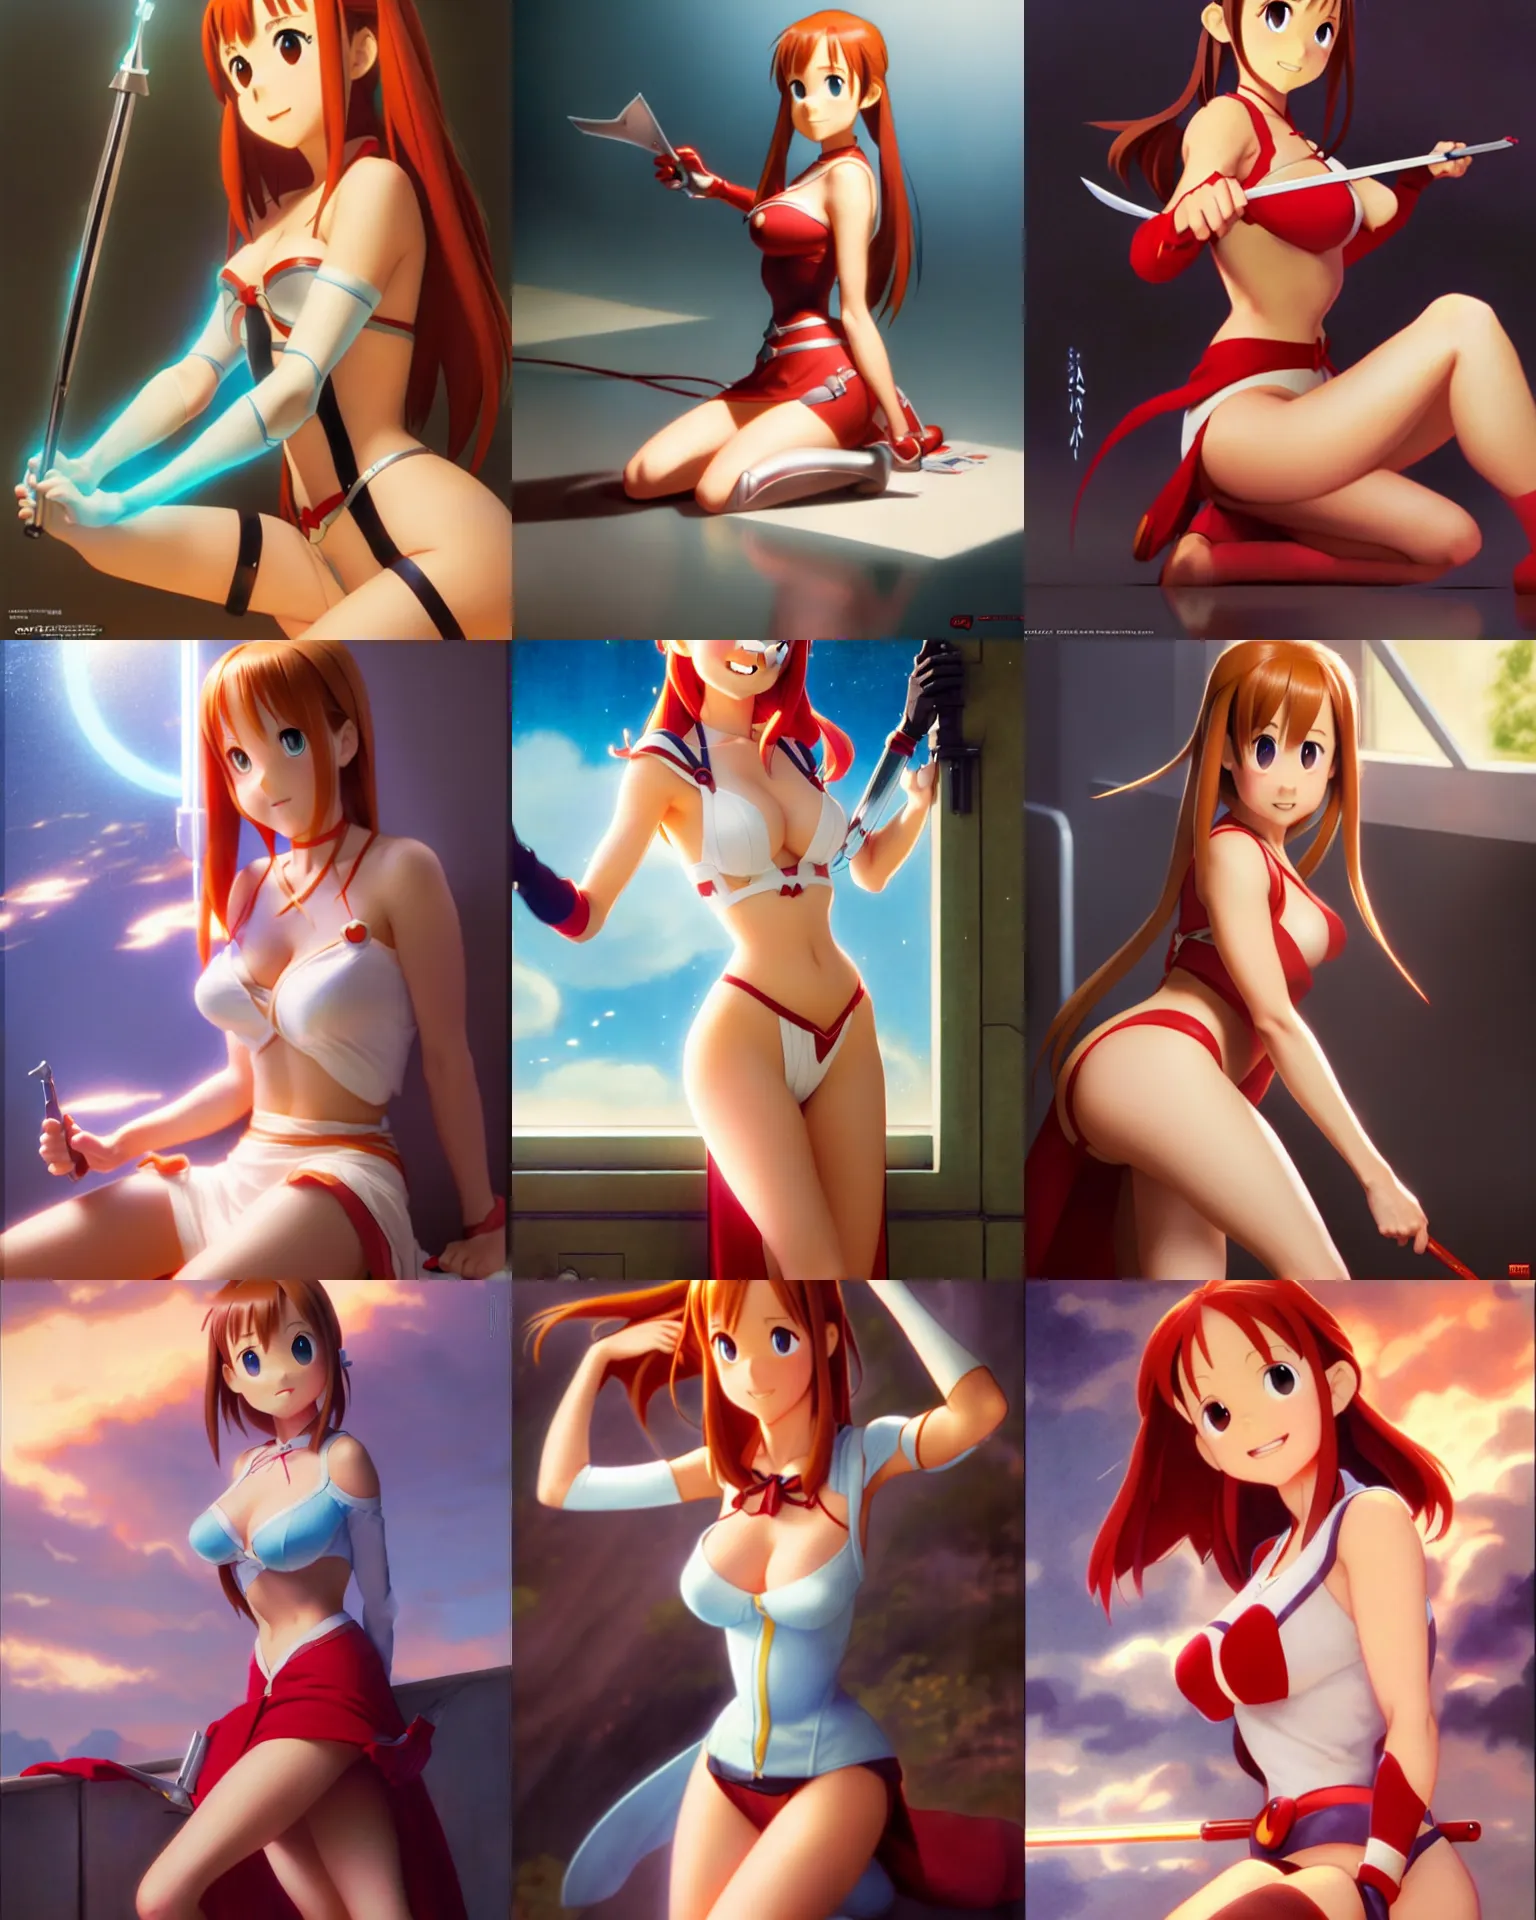 Prompt: pixar movie still pinup photo of asuna from sao play with herself, asuna by a - 1 pictures, by greg rutkowski, gil elvgren, enoch bolles, glossy skin, pearlescent, anime, maxim magazine, very coherent